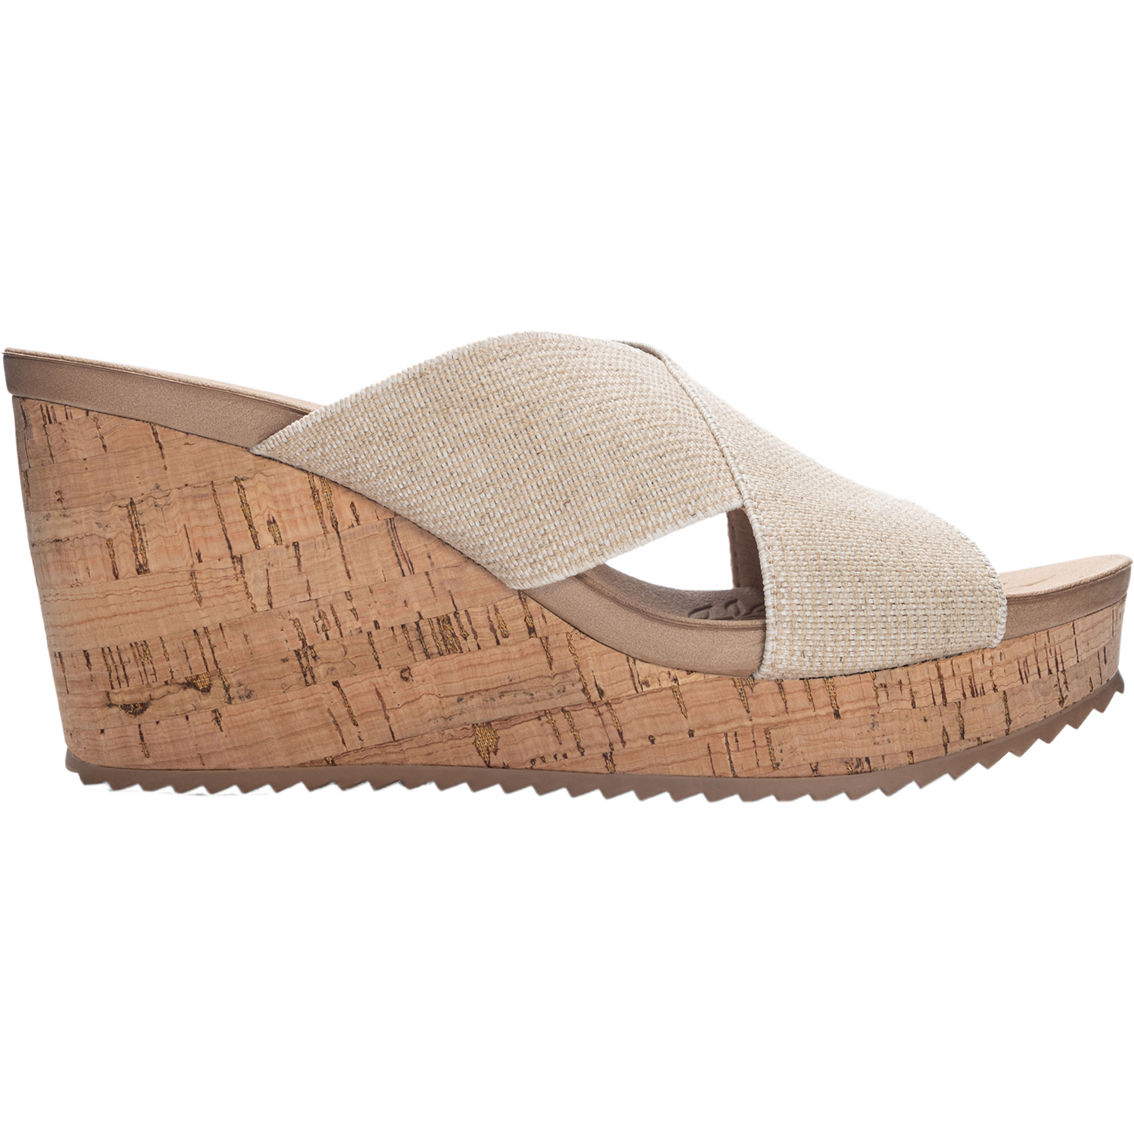 CL by Laundry Kindling Wedge Sandals - Image 2 of 5